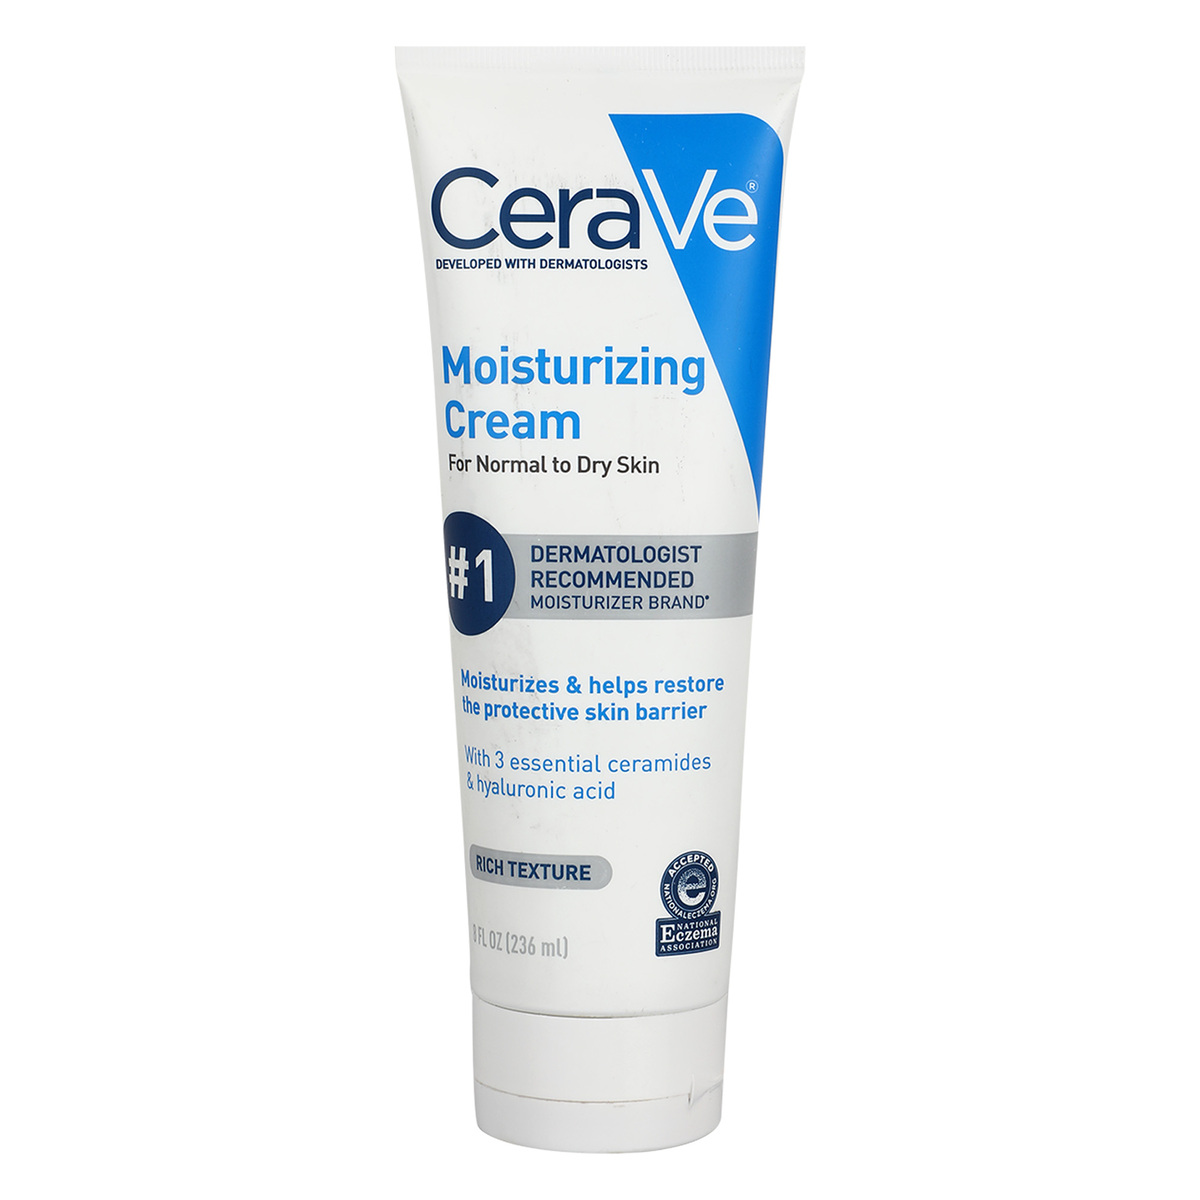 CeraVe Moisturizing Cream for Normal to Dry Skin, Rich Texture, 236 ml